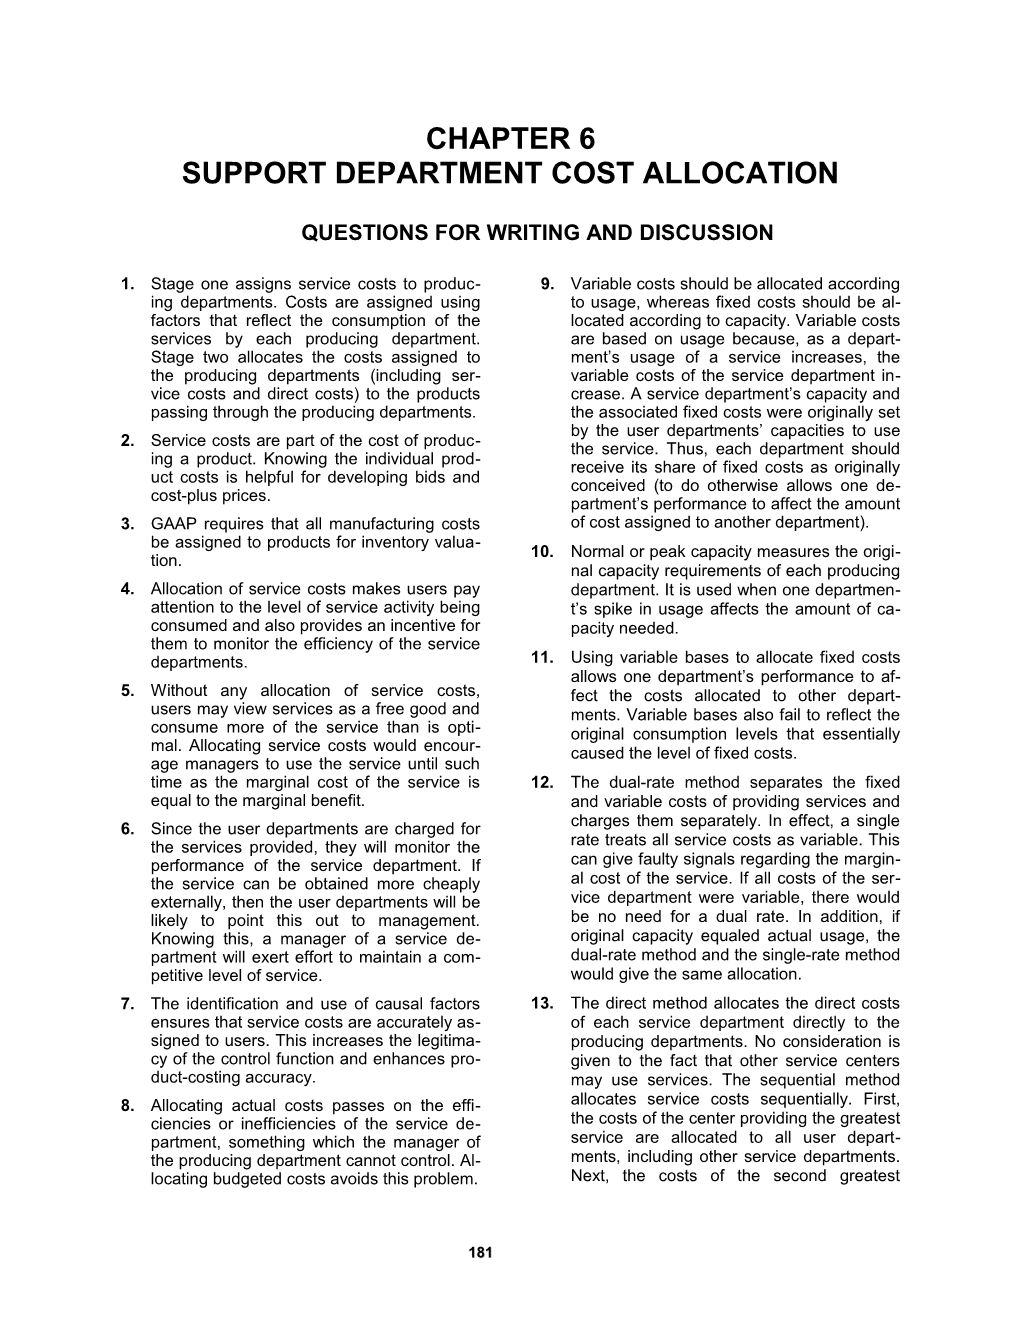 Chapter 6: Support Department Cost Allocation